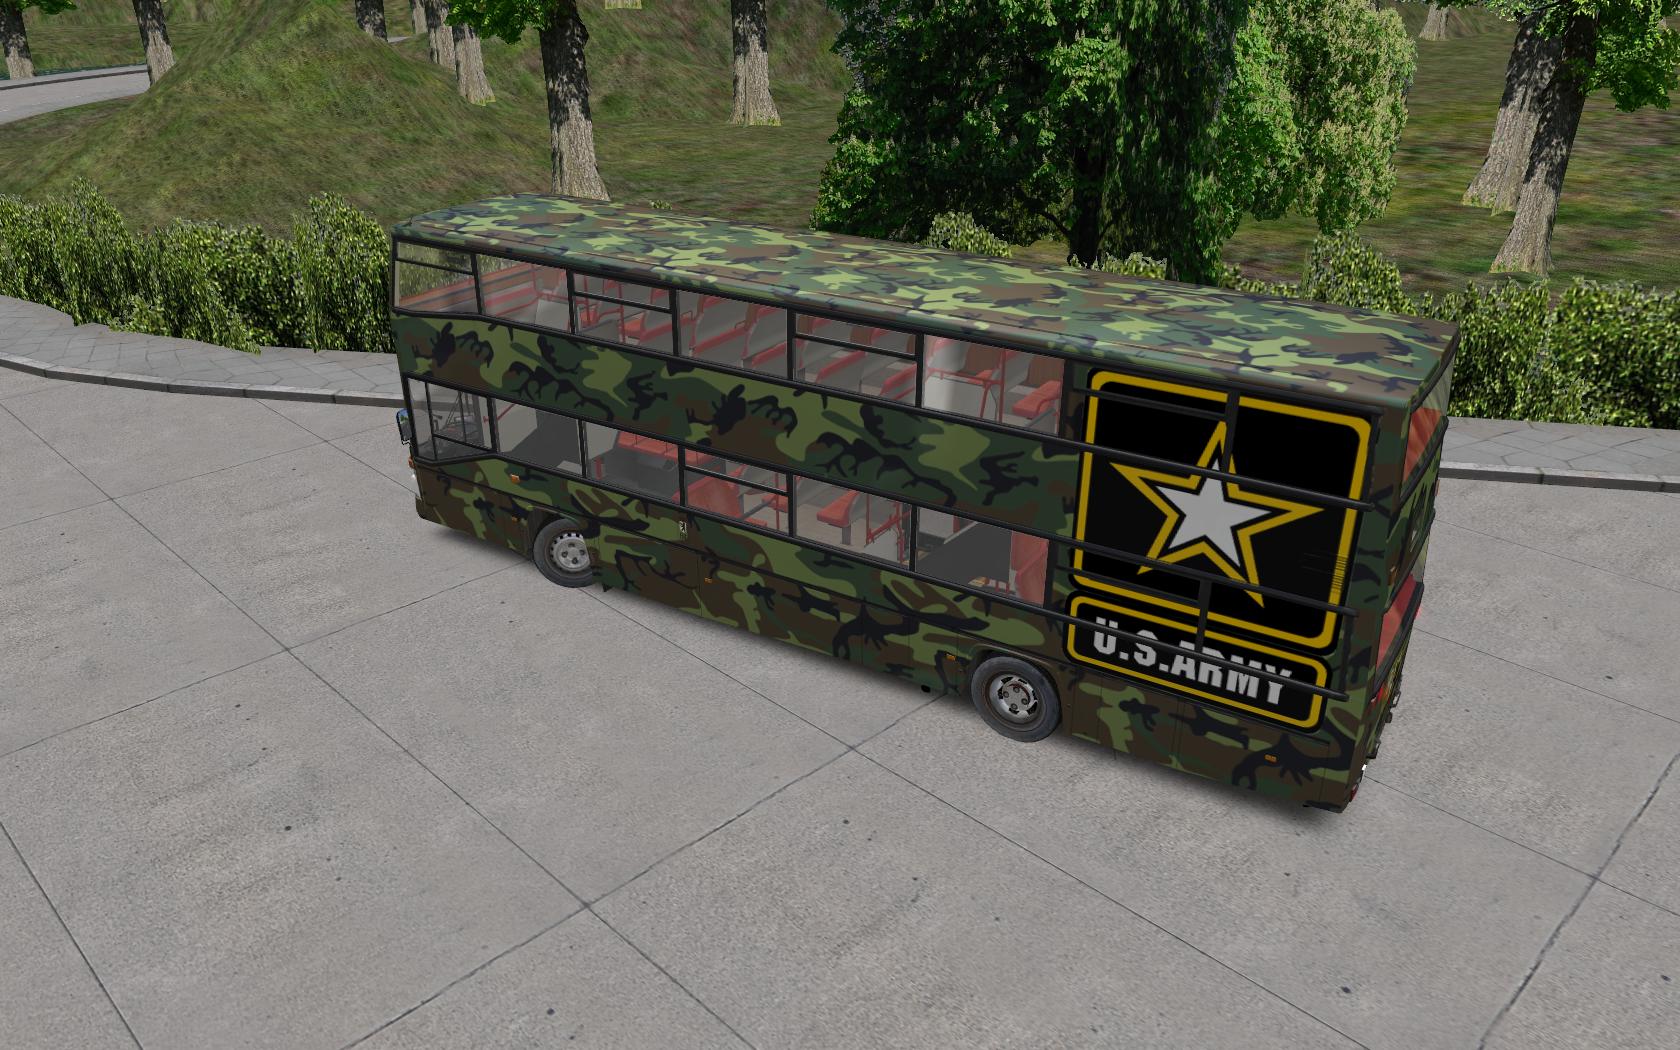 More information about "D92_US Army"